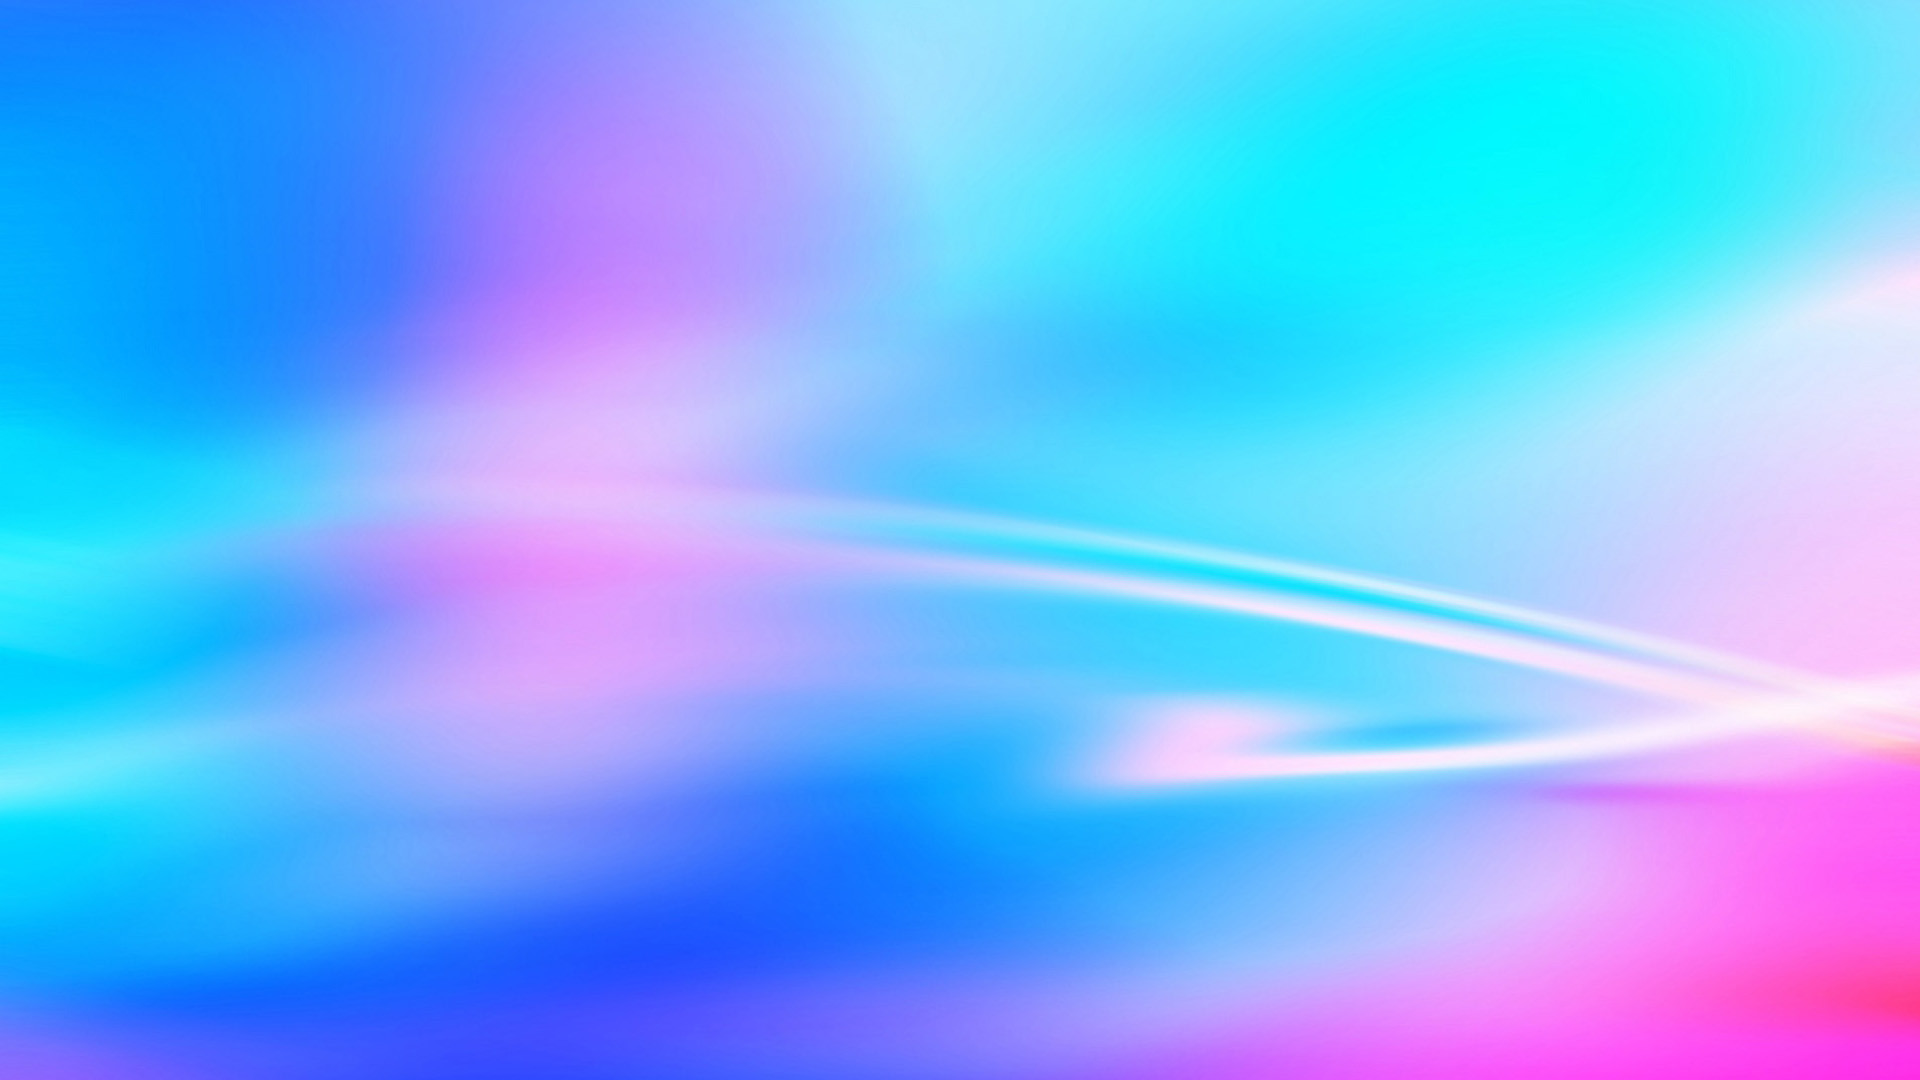 1920x1080 Pink And Blue Sky Wallpapers High Quality Resolution For Laptop Wallpaper